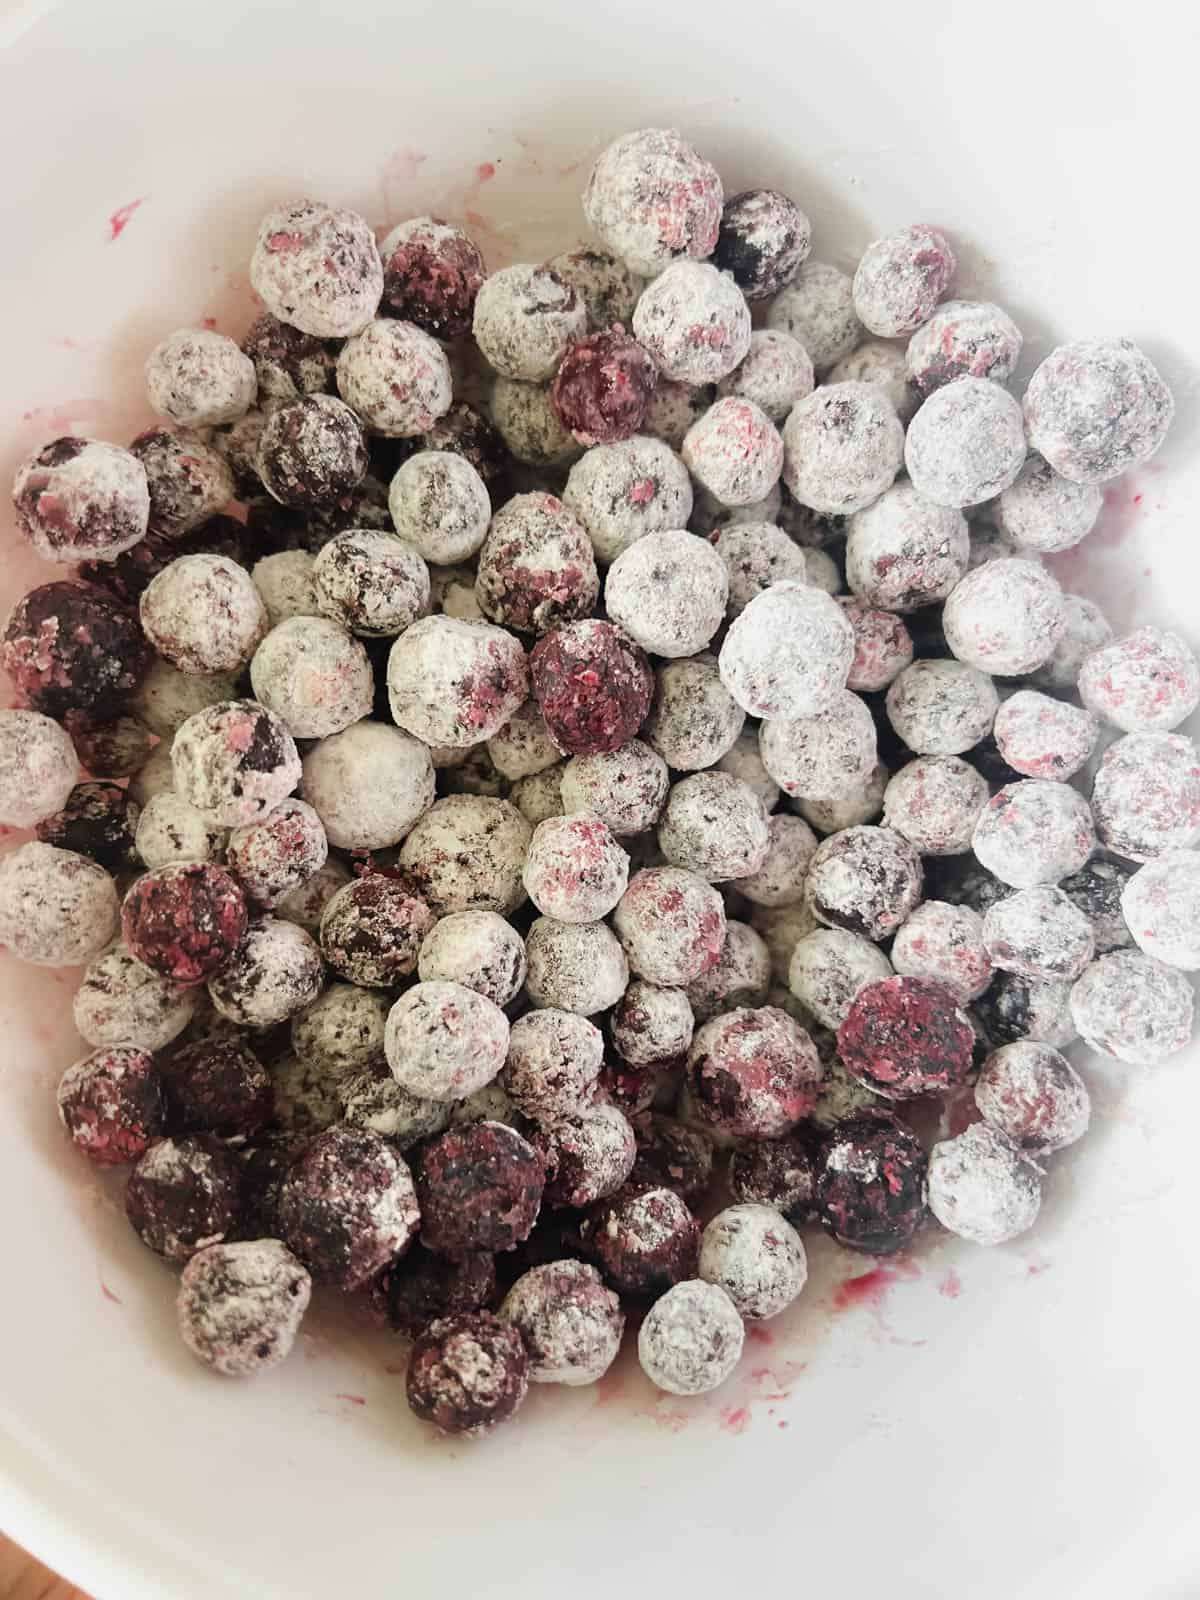 Flour added to frozen blueberries in a bowl.